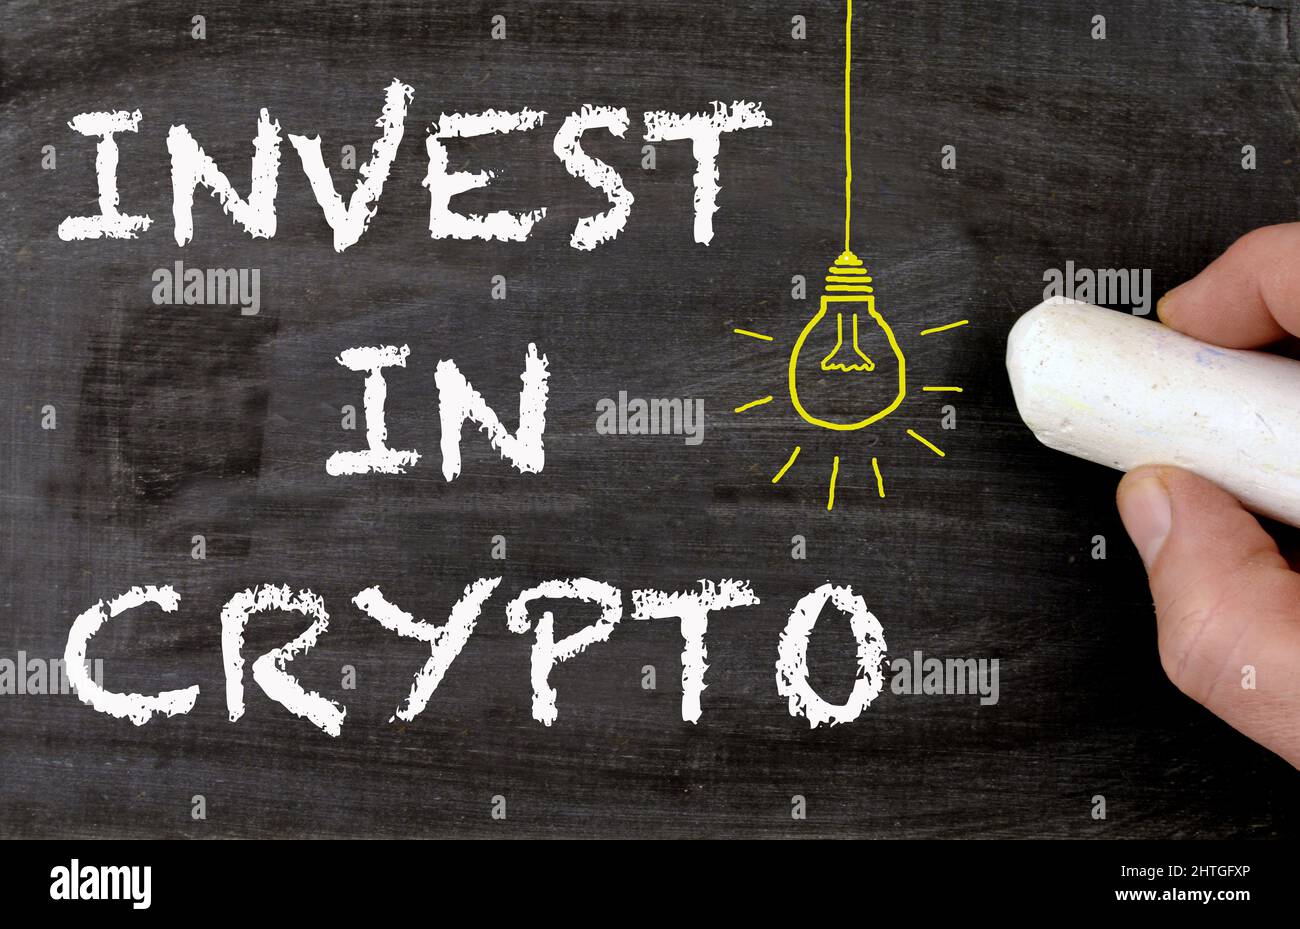 Invest in crypto blackboard with lamp as an idea symbol Stock Photo